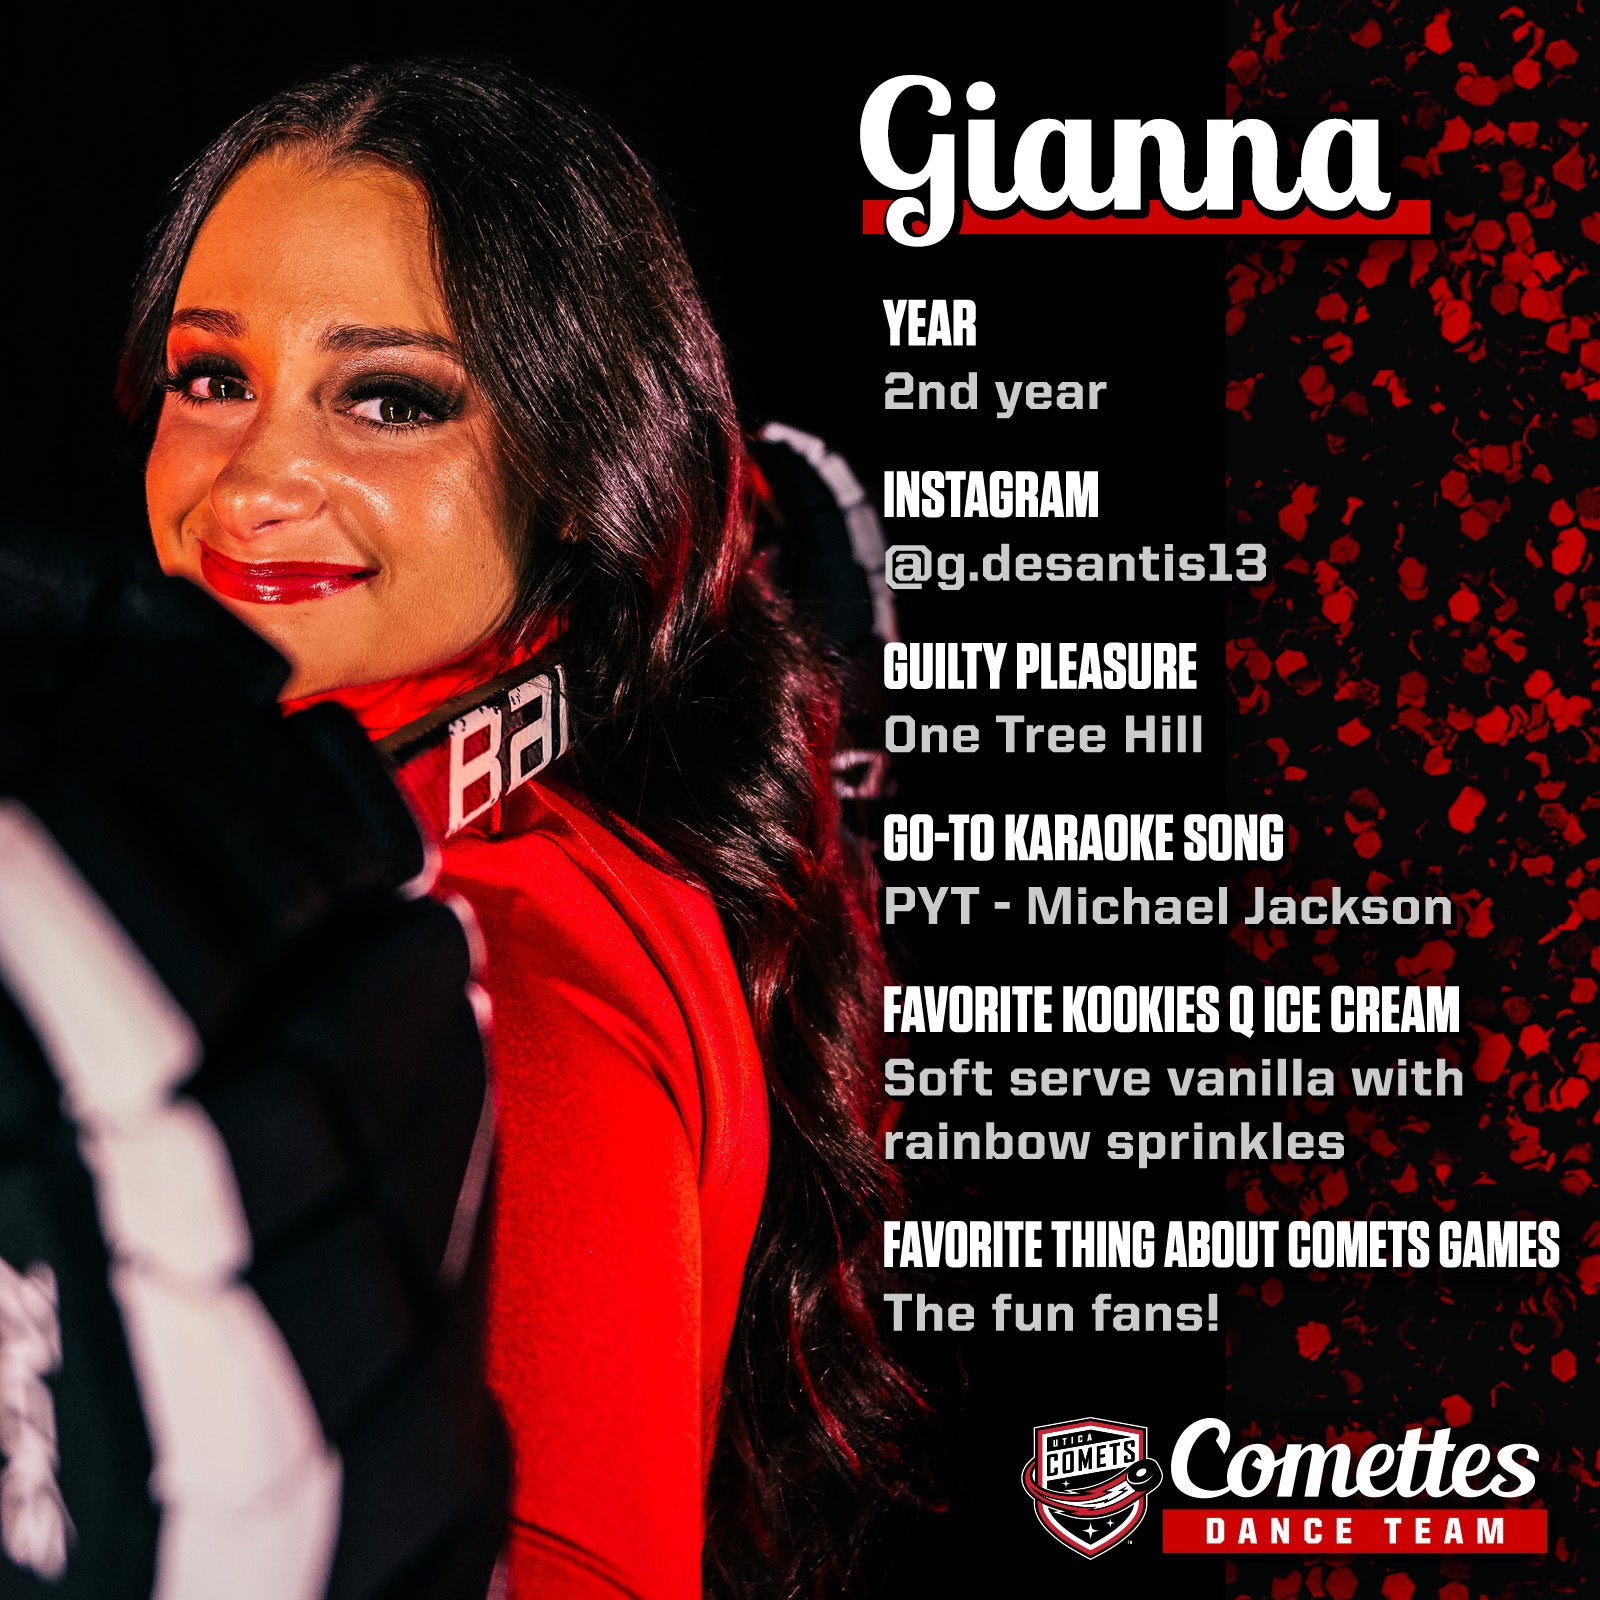 Meet The Comettes_Template_Gianna copy.jpg